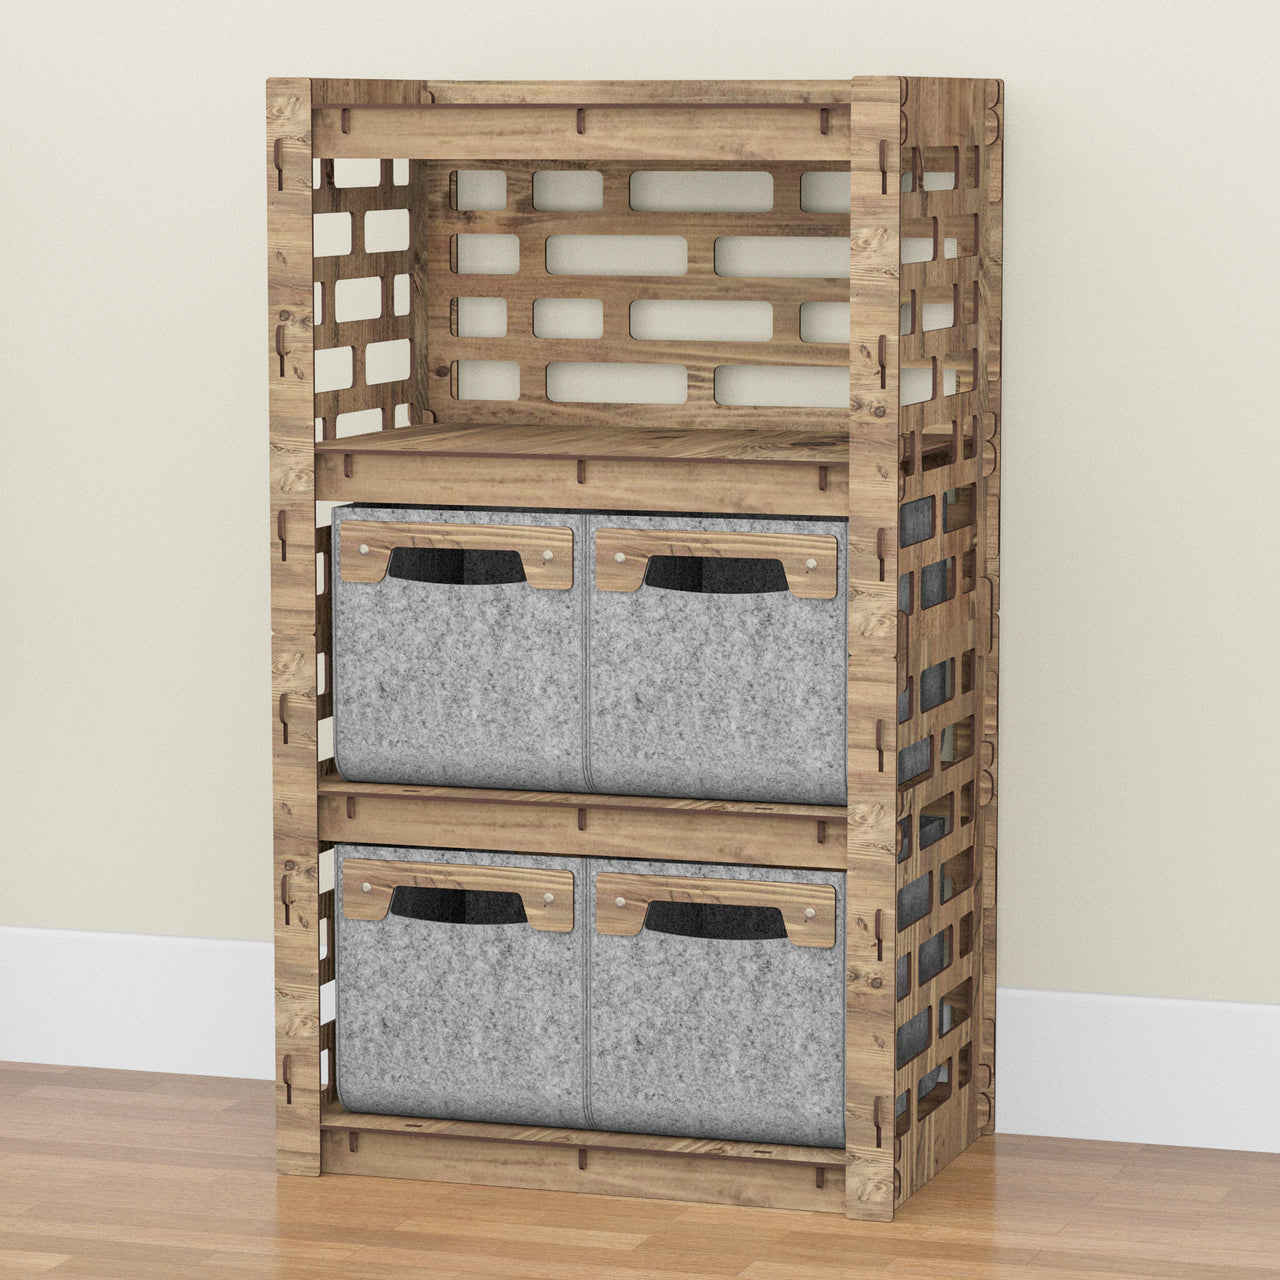 Brickwall Chest Of 4 Drawers Storage Cabinet [4 SMALL GRAY BINS]